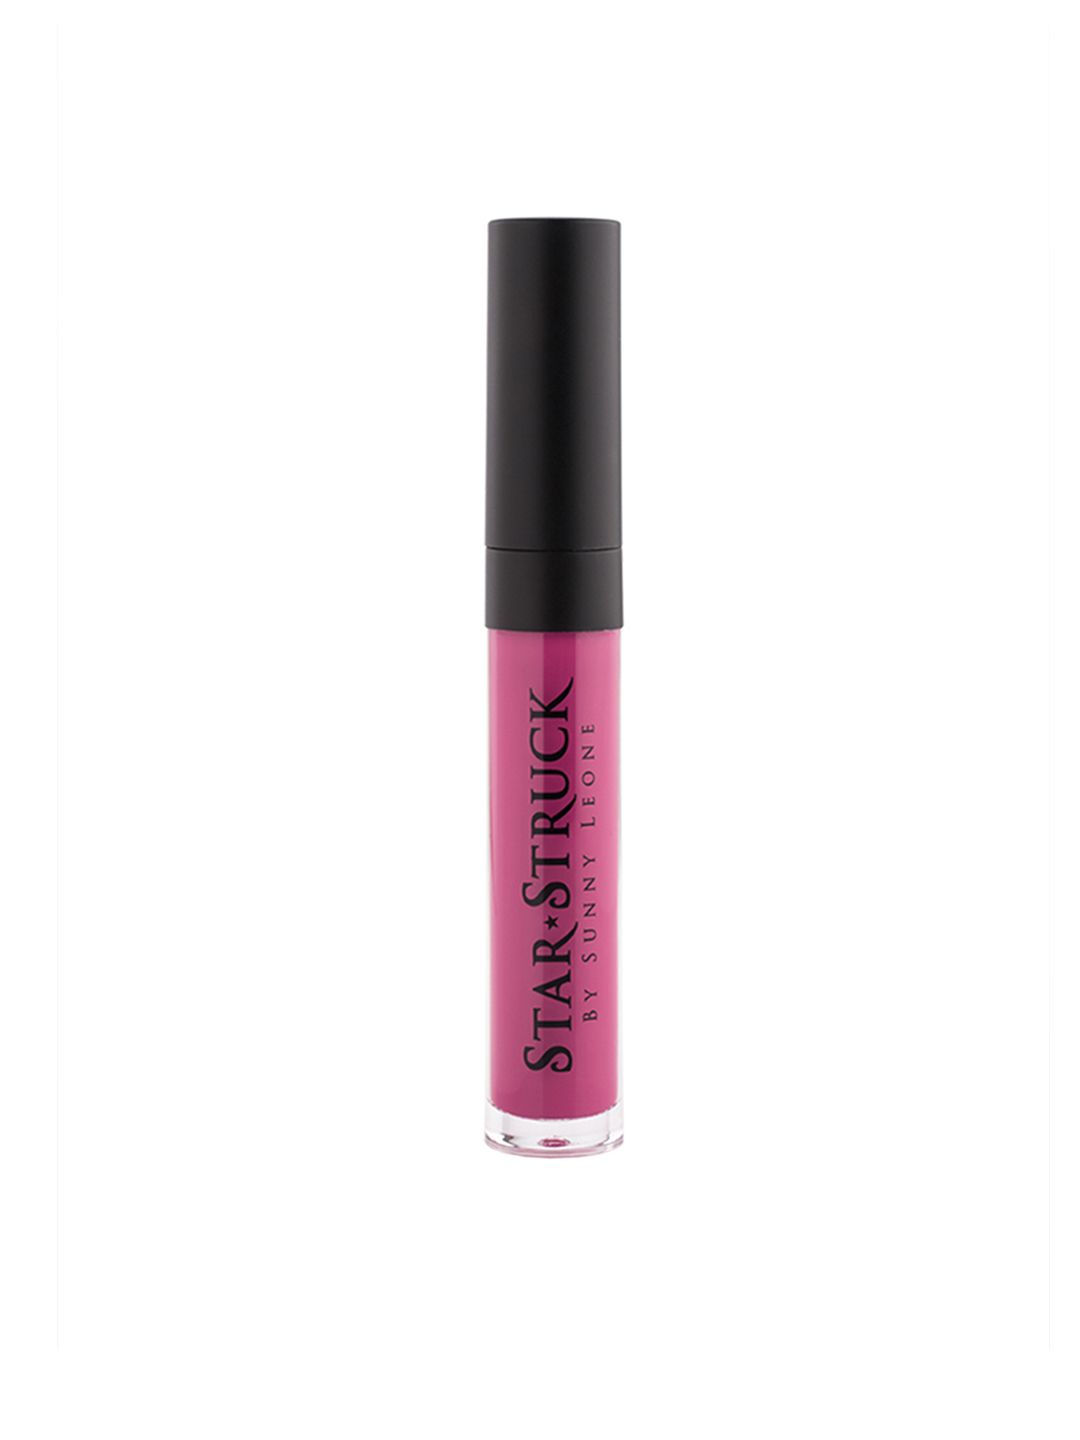 Star Struck by Sunny Leone Liquid Lip Color - Kiss Me Pink Price in India